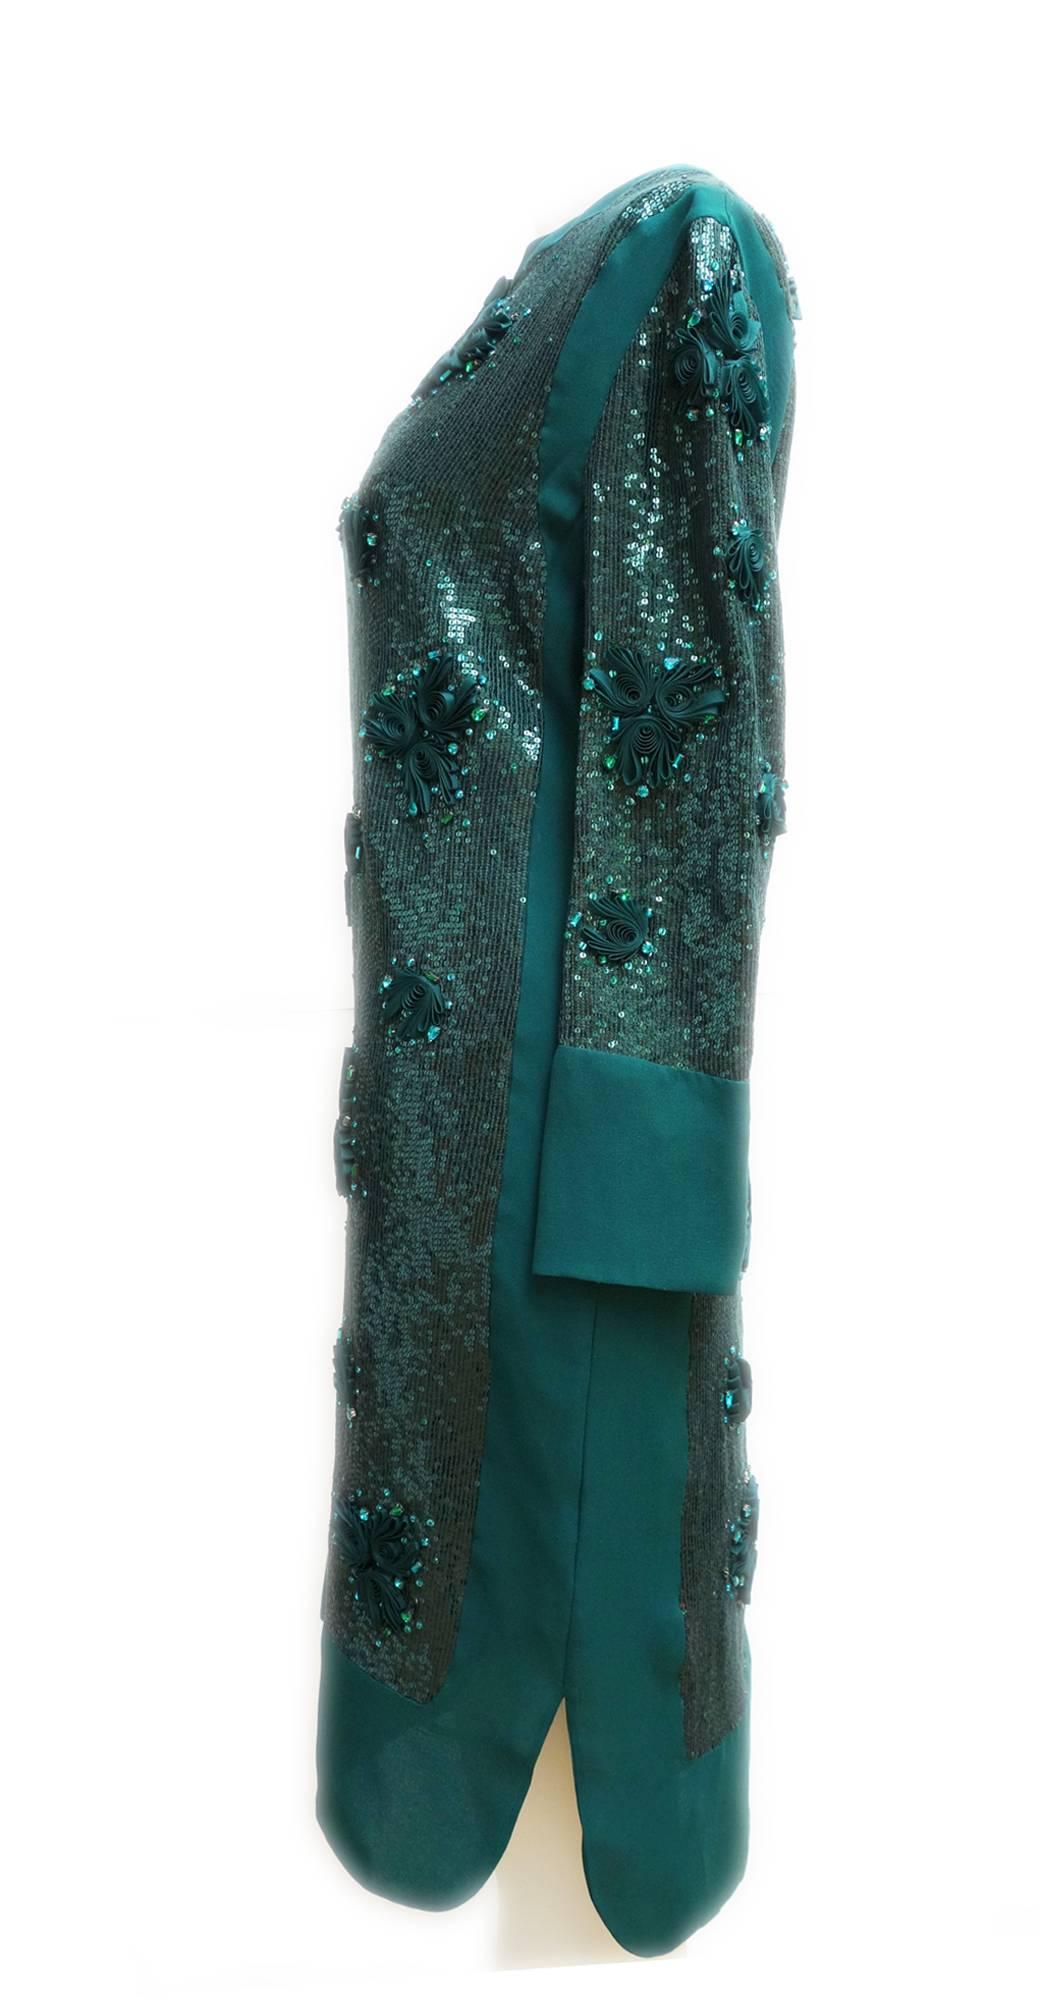 Authentic VALENTINO Emerald Green Sequin Beaded Dress Size 8
New without tag. Retail: $5,990.-

This jaw-dropping, but timelessly elegant dress is embellished with thousands of sequins that shimmer in the light, accented by floret ribbons on